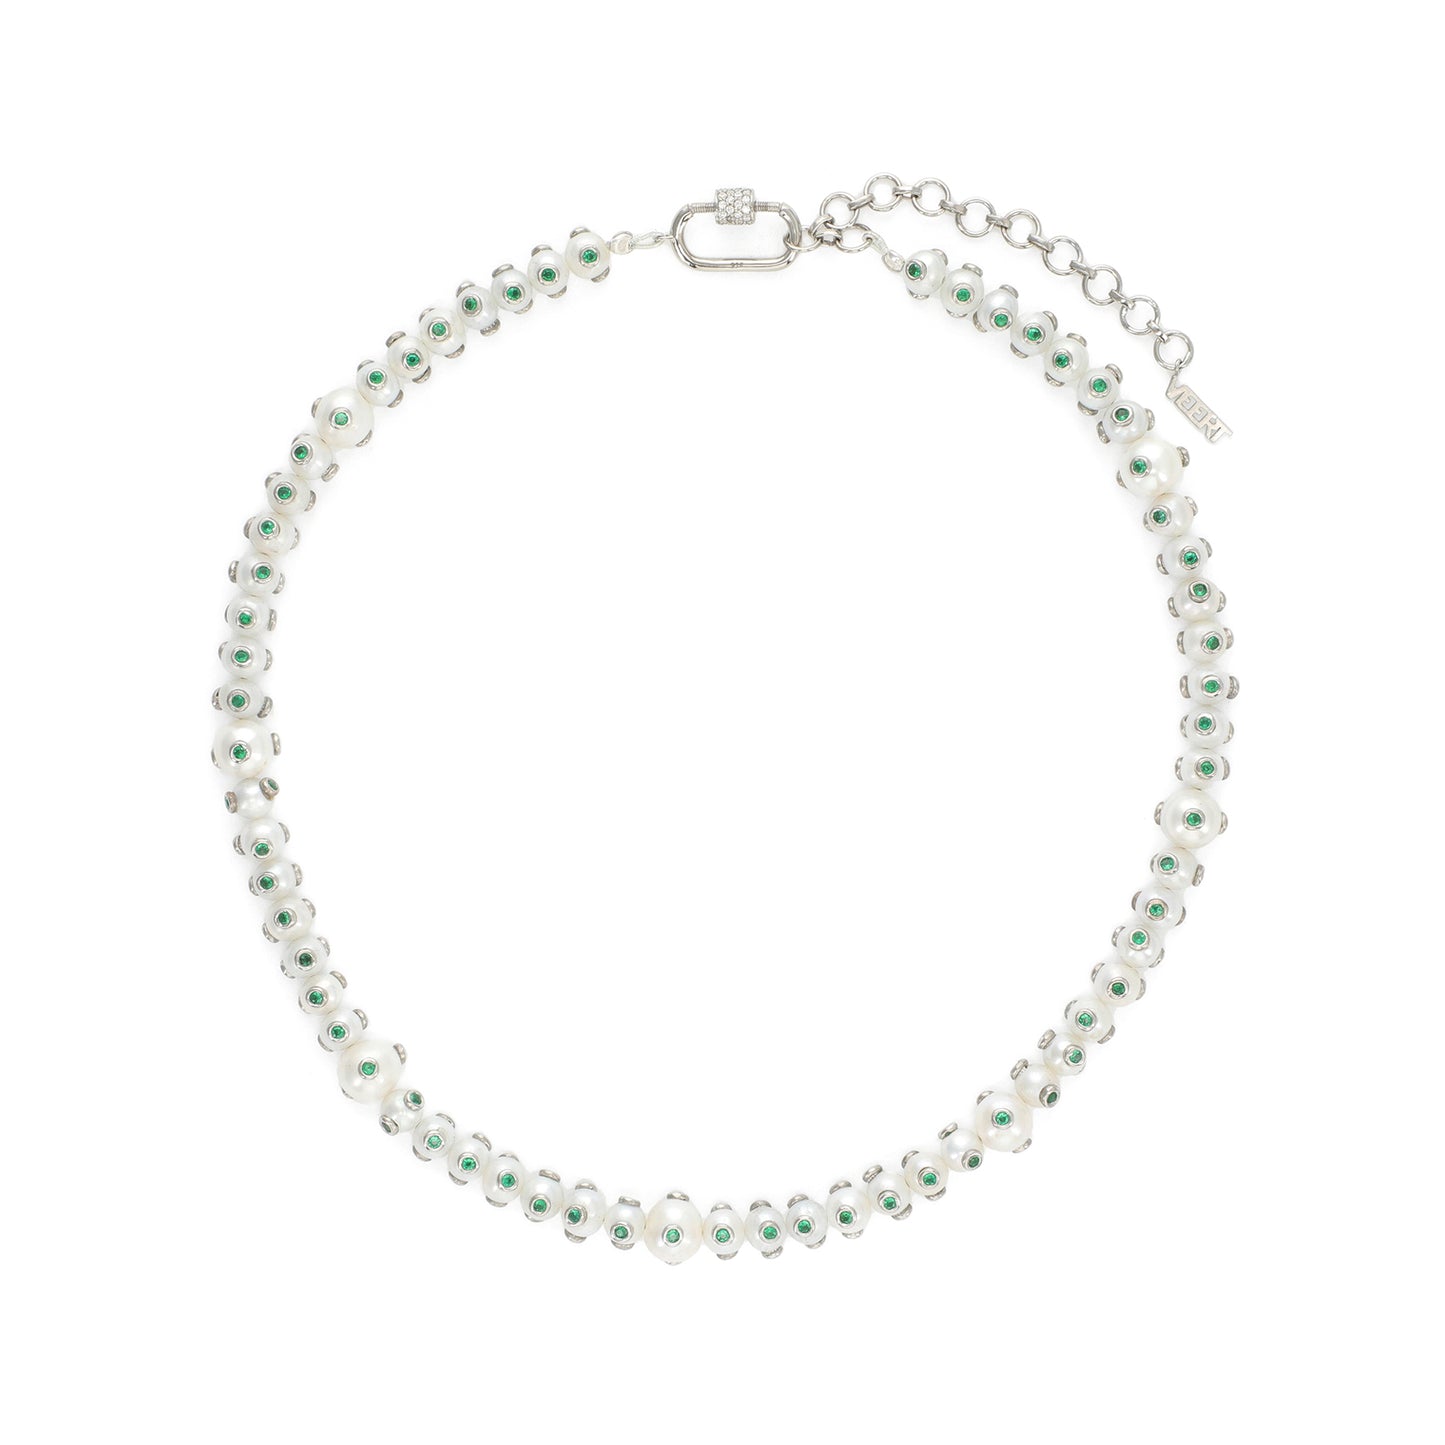 VEERT The Green Polka Dot Freshwater Pearl Necklace (White Gold)